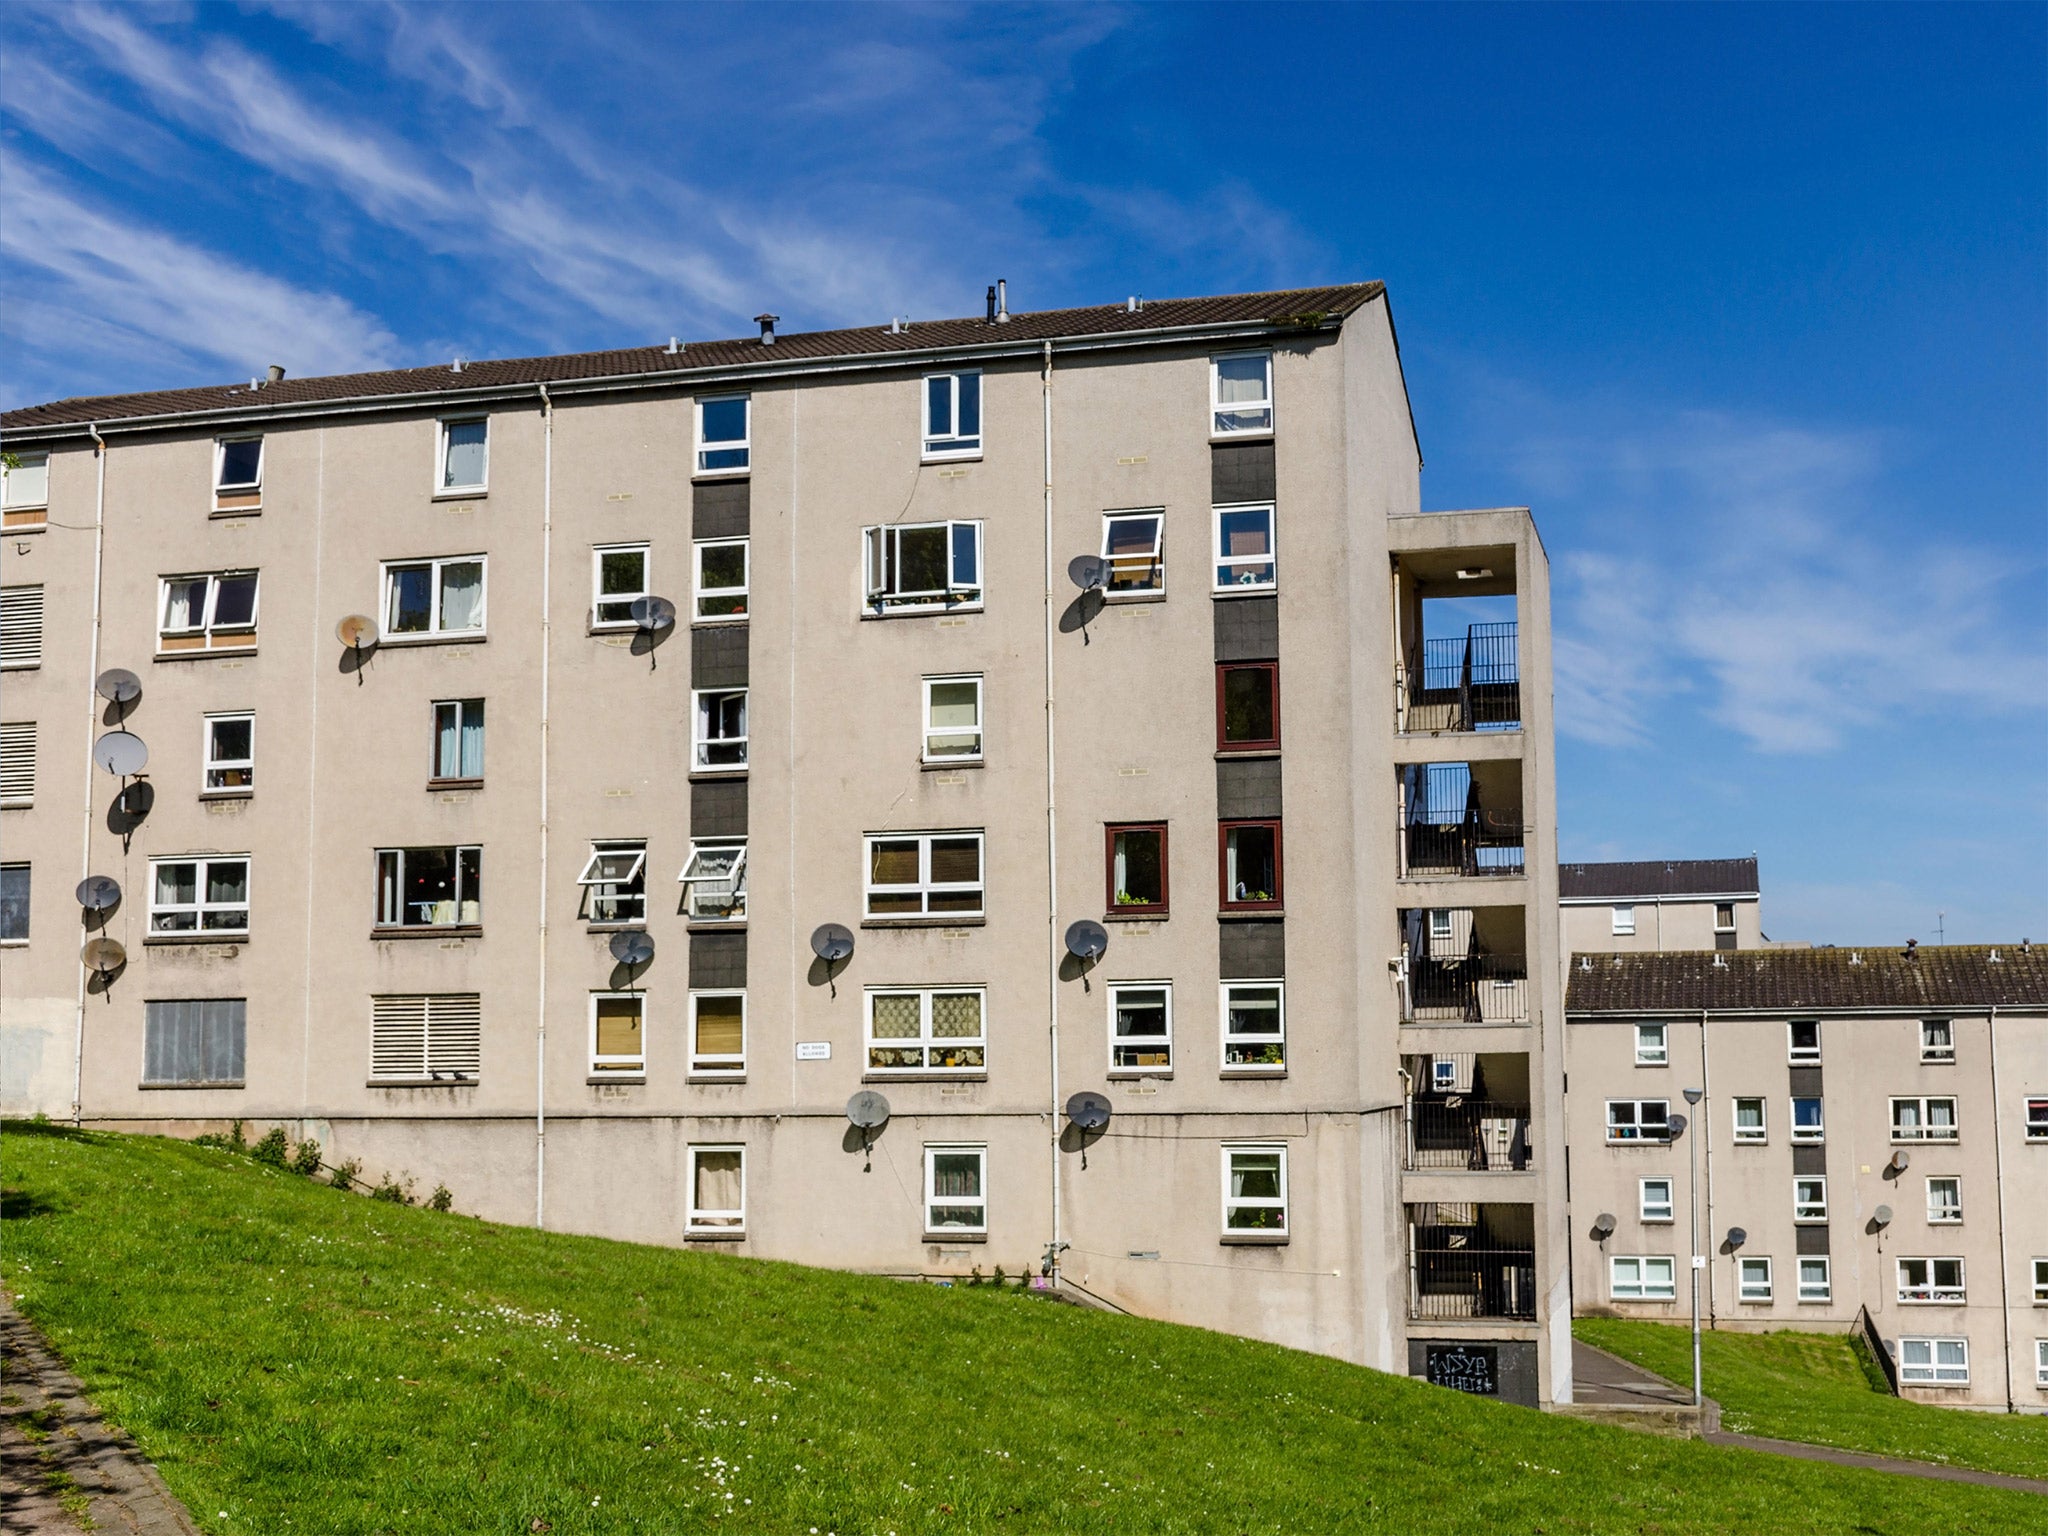 Northern exposure: social housing in Edinburgh, where Hassiba now works in a takeaway